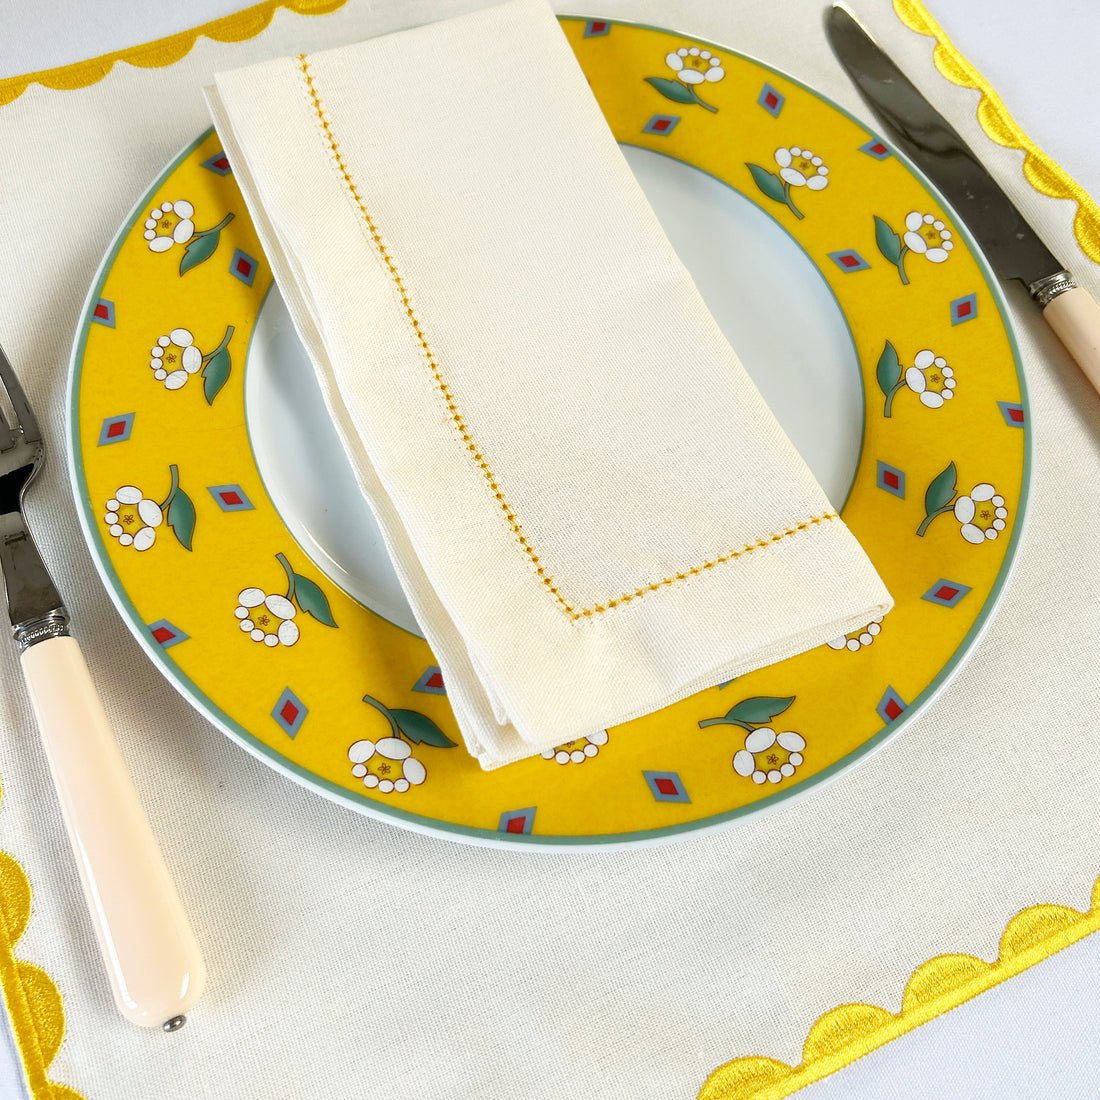 Stitched Edge Placemats  | Set of 4